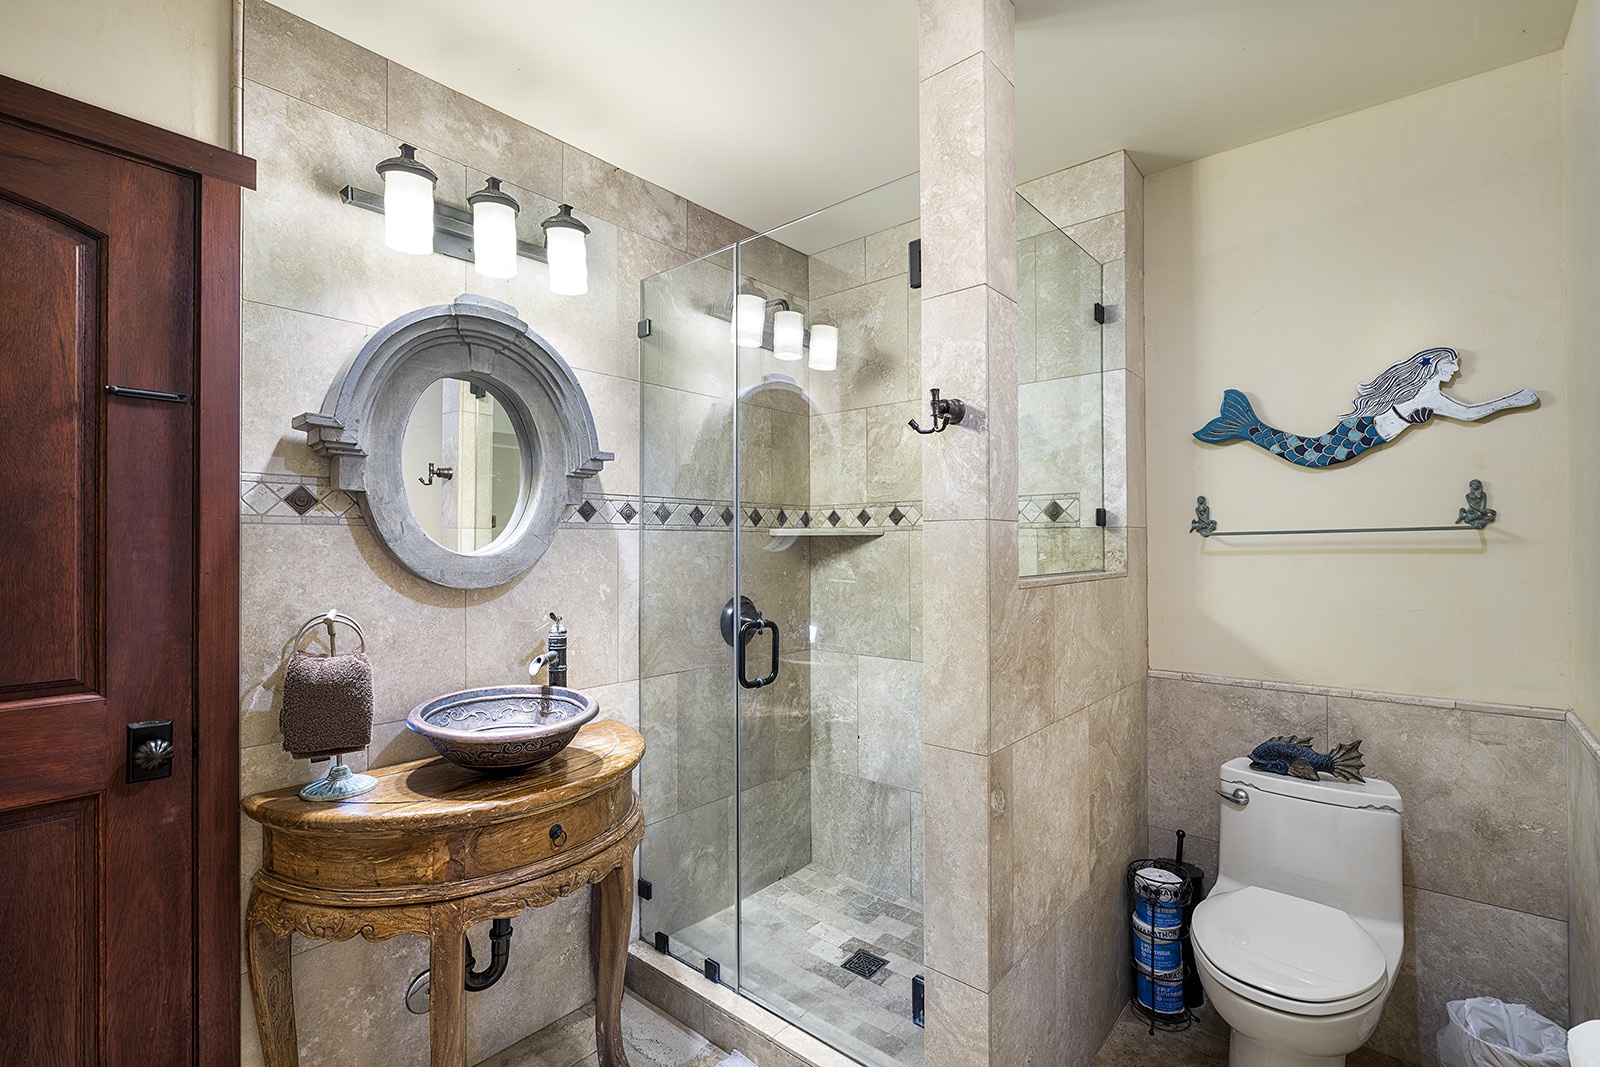 Kailua Kona Vacation Rentals, Mermaid Cove - Guest bathroom with access from the bedroom and pool area